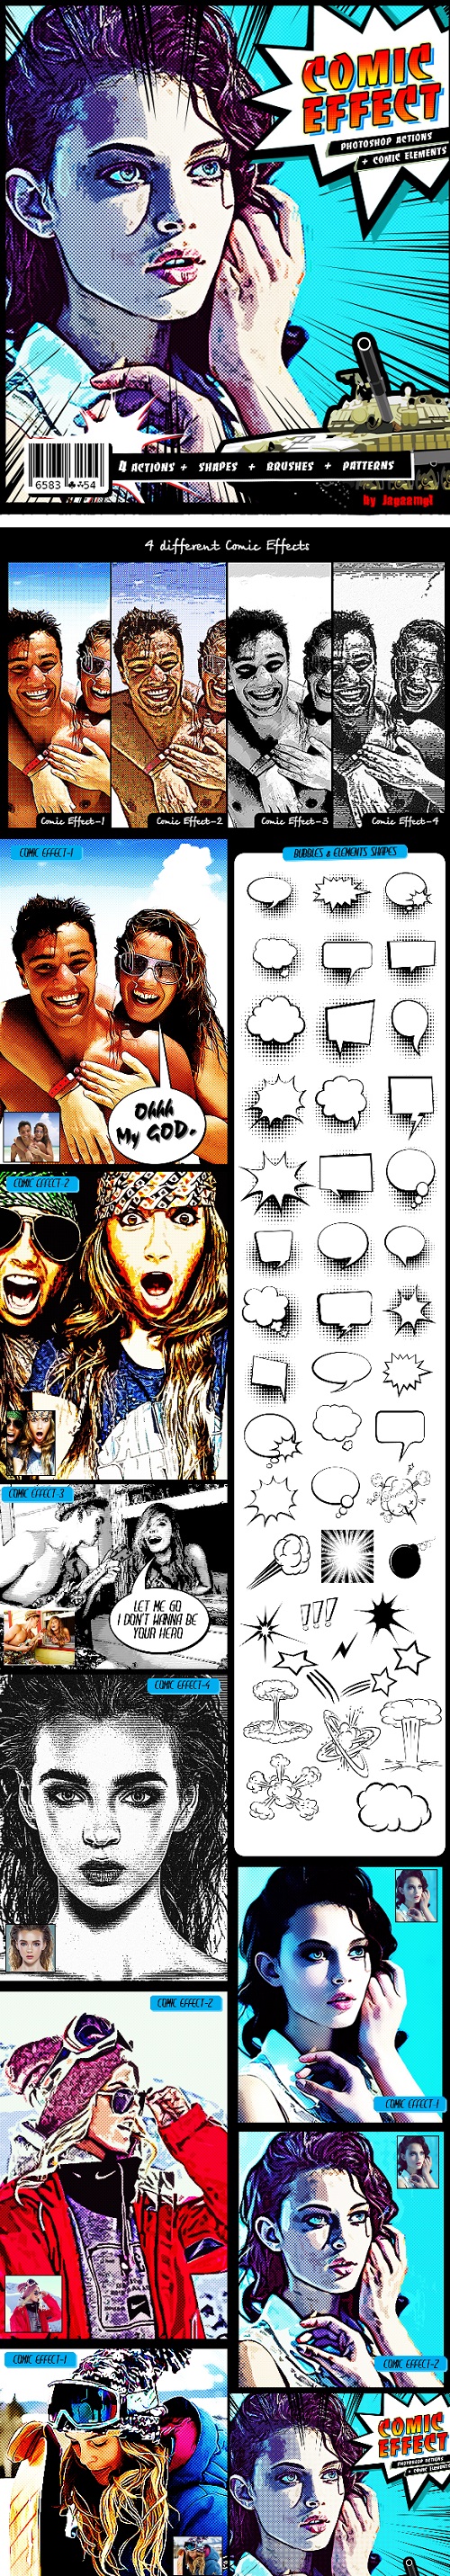 Comic Effect PS Actions 20441750